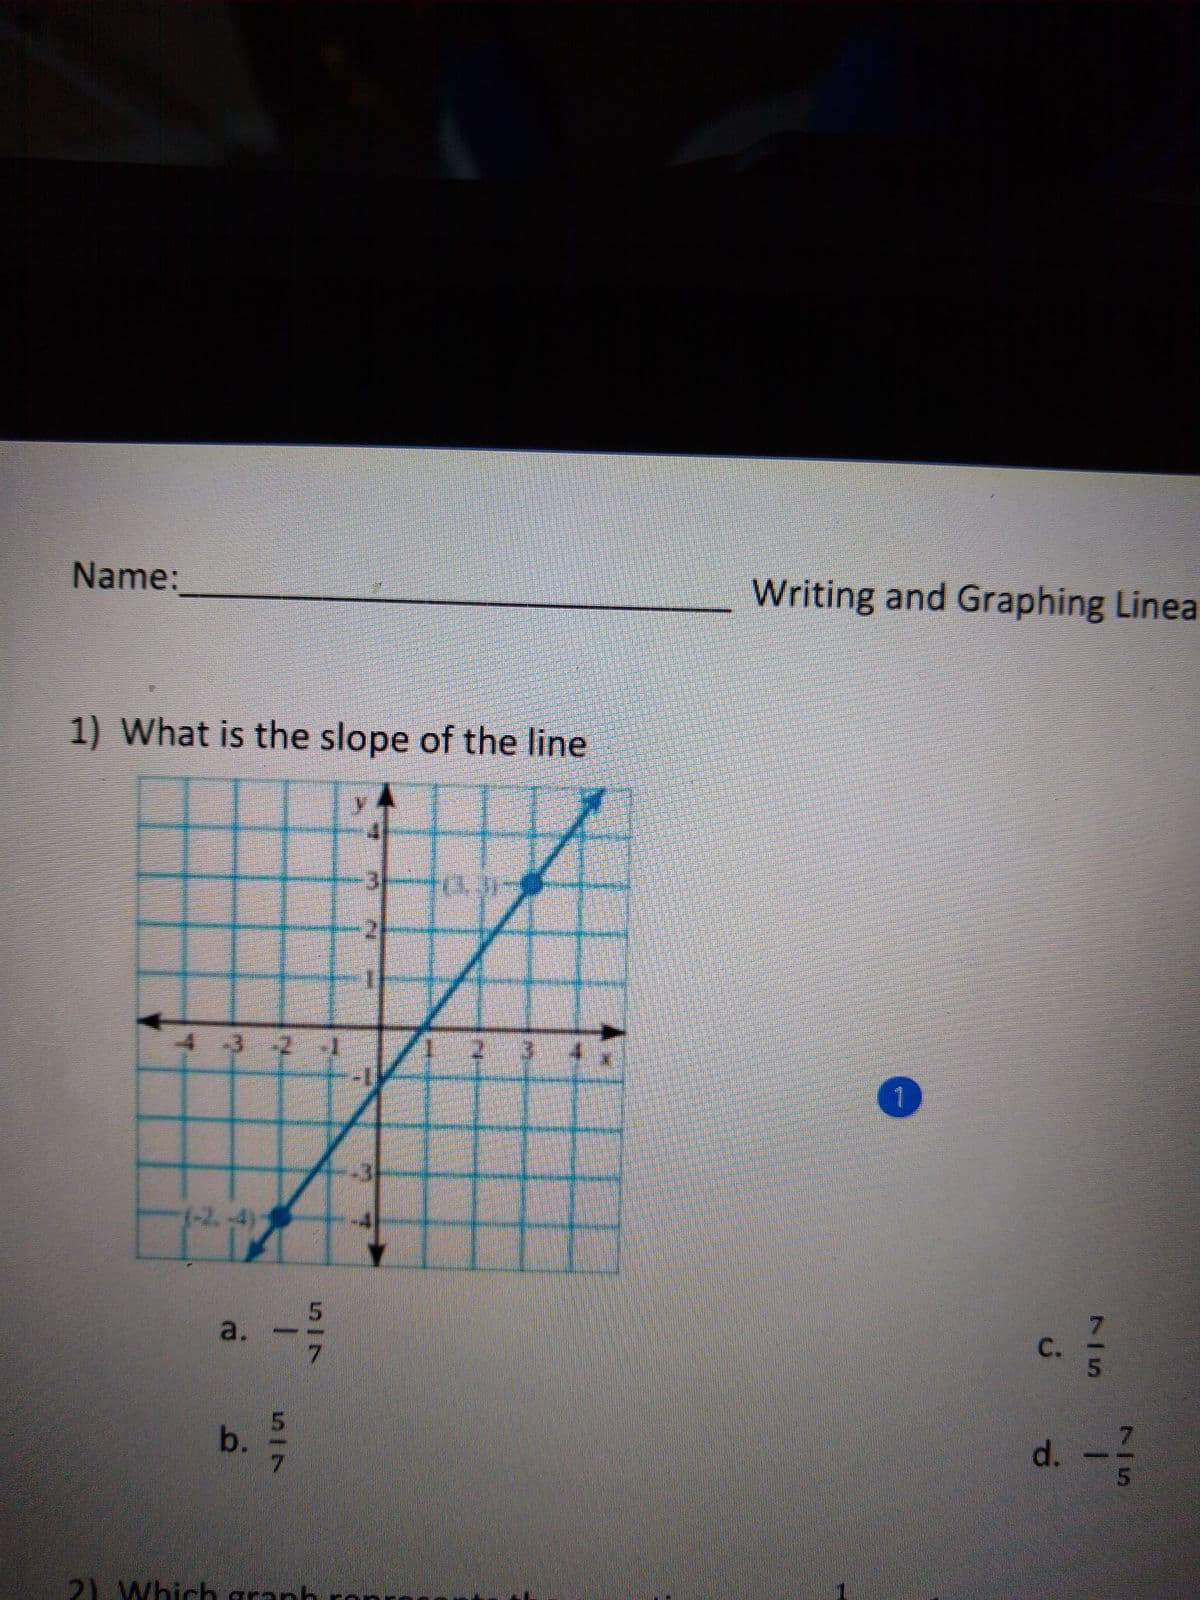 Name:
Writing and Graphing Linea
1) What is the slope of the line
43 2 1
(-2.-4)
5.
a.
5.
7.
2) Which granh ro
7/5
75
C.
d.
b.
